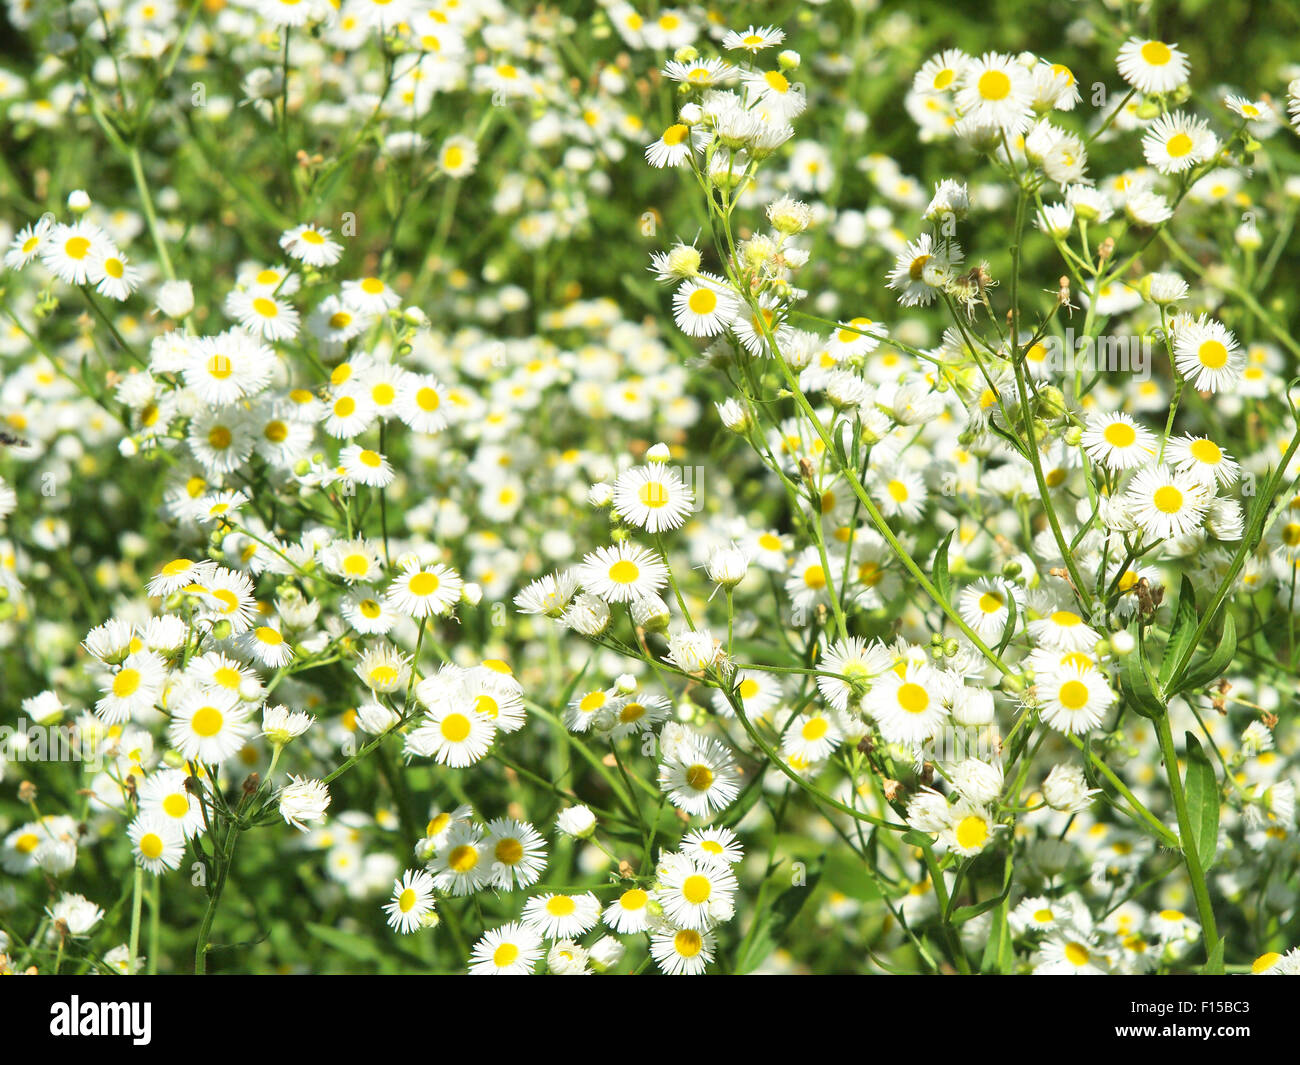 Green field with white daisies closeup throughout the image. Selective focus. Stock Photo